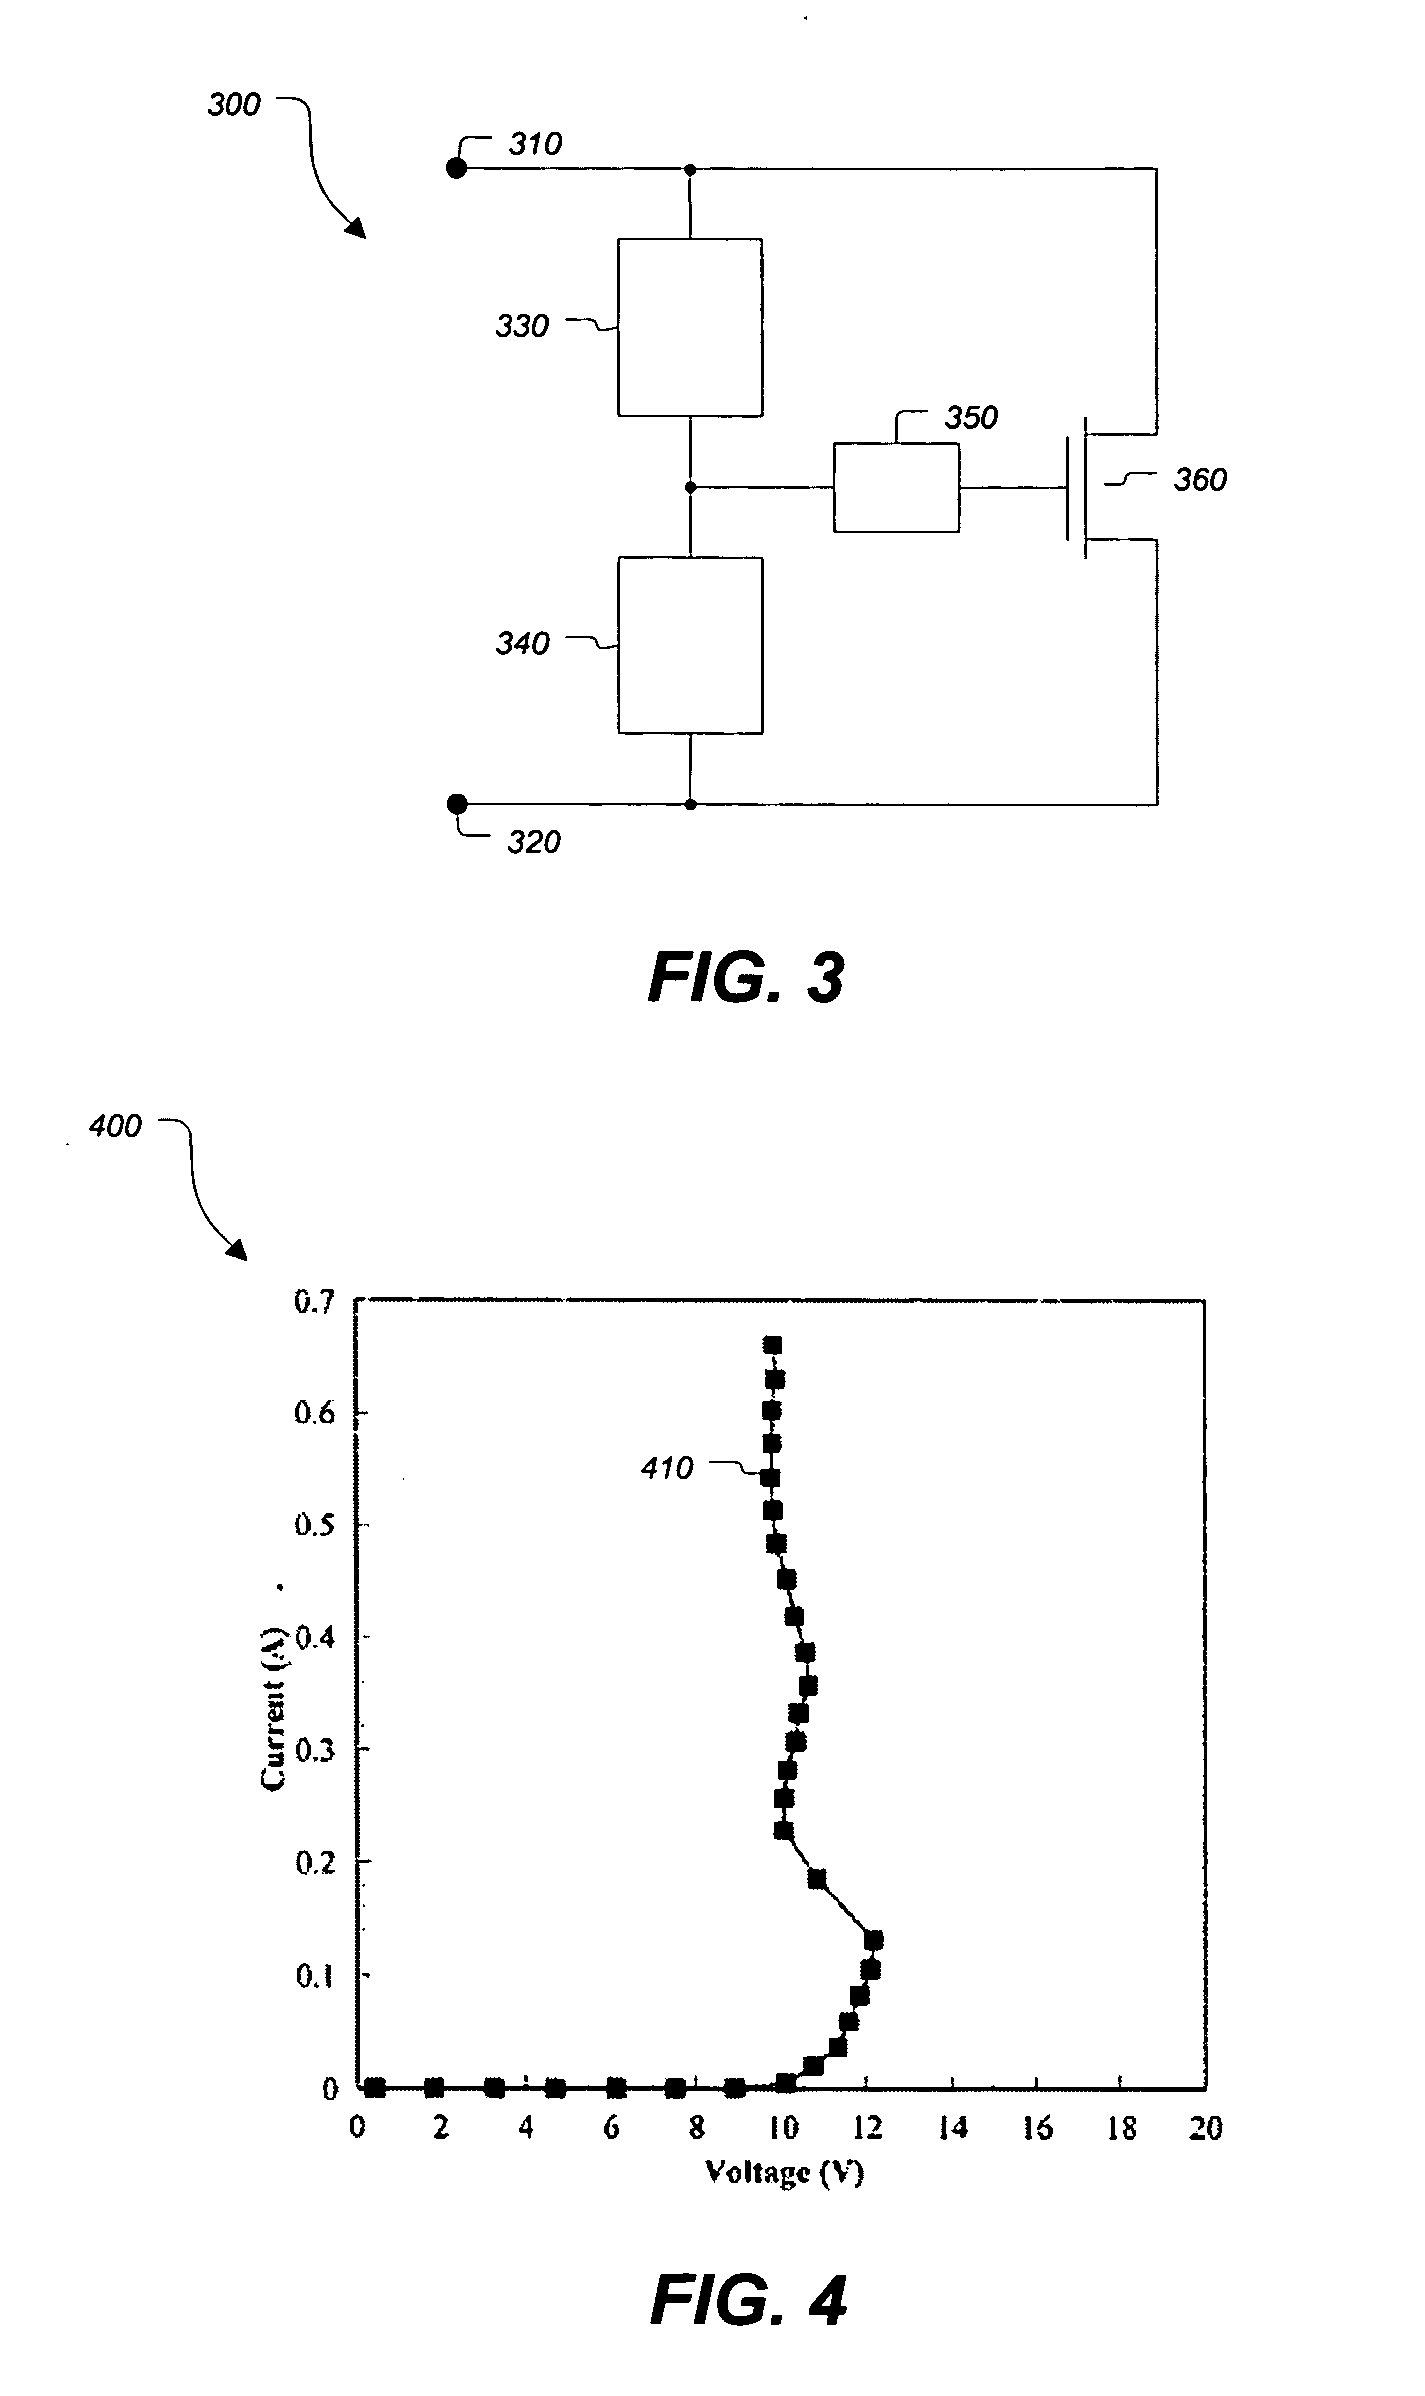 Electrostatic discharge protection circuit for compound semiconductor devices and circuits